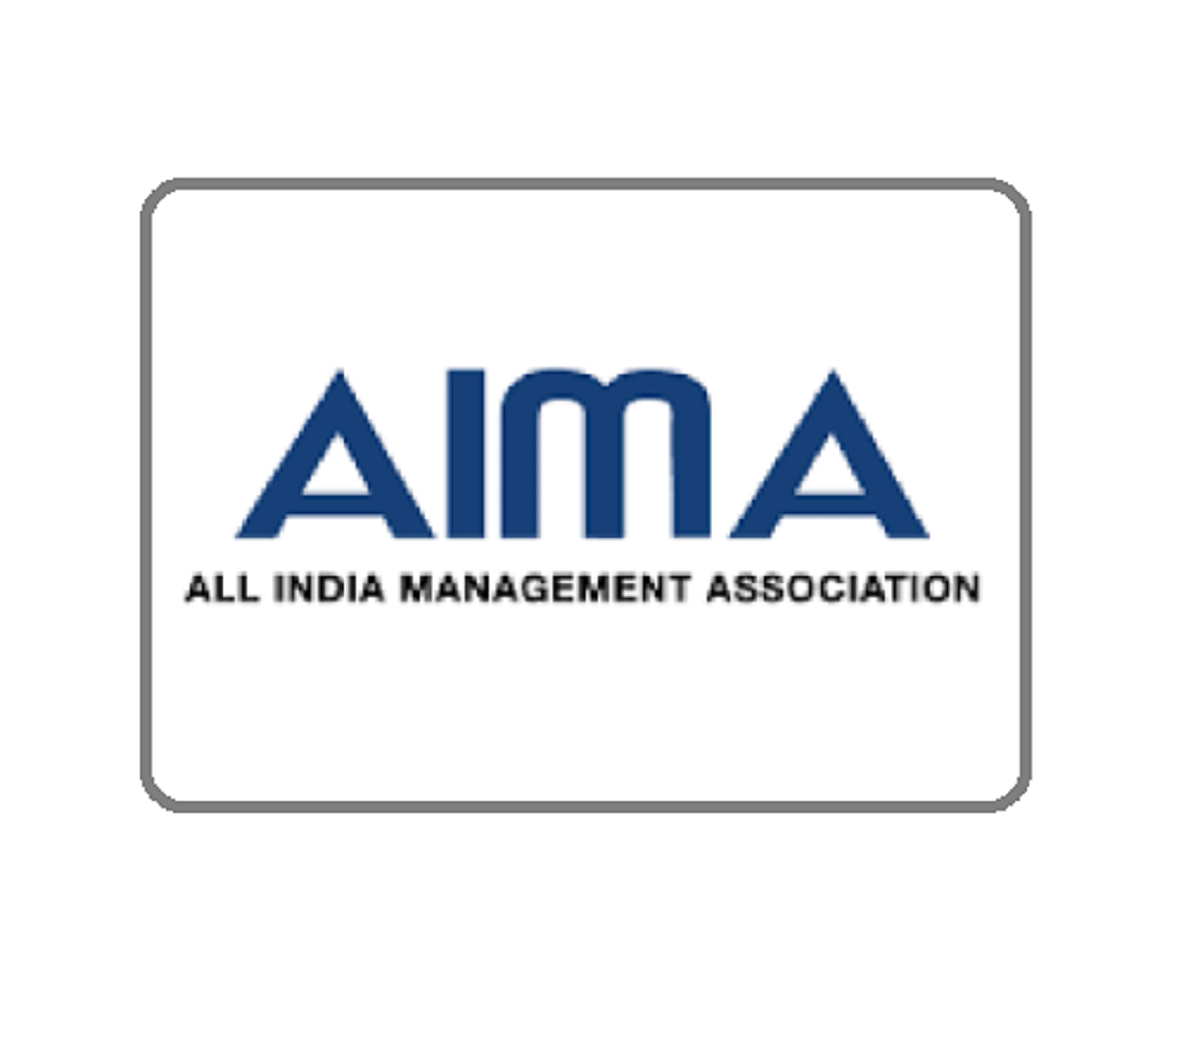 AIMA MAT 2021 PBT Admit Card Released, Check Steps & Direct Link Here